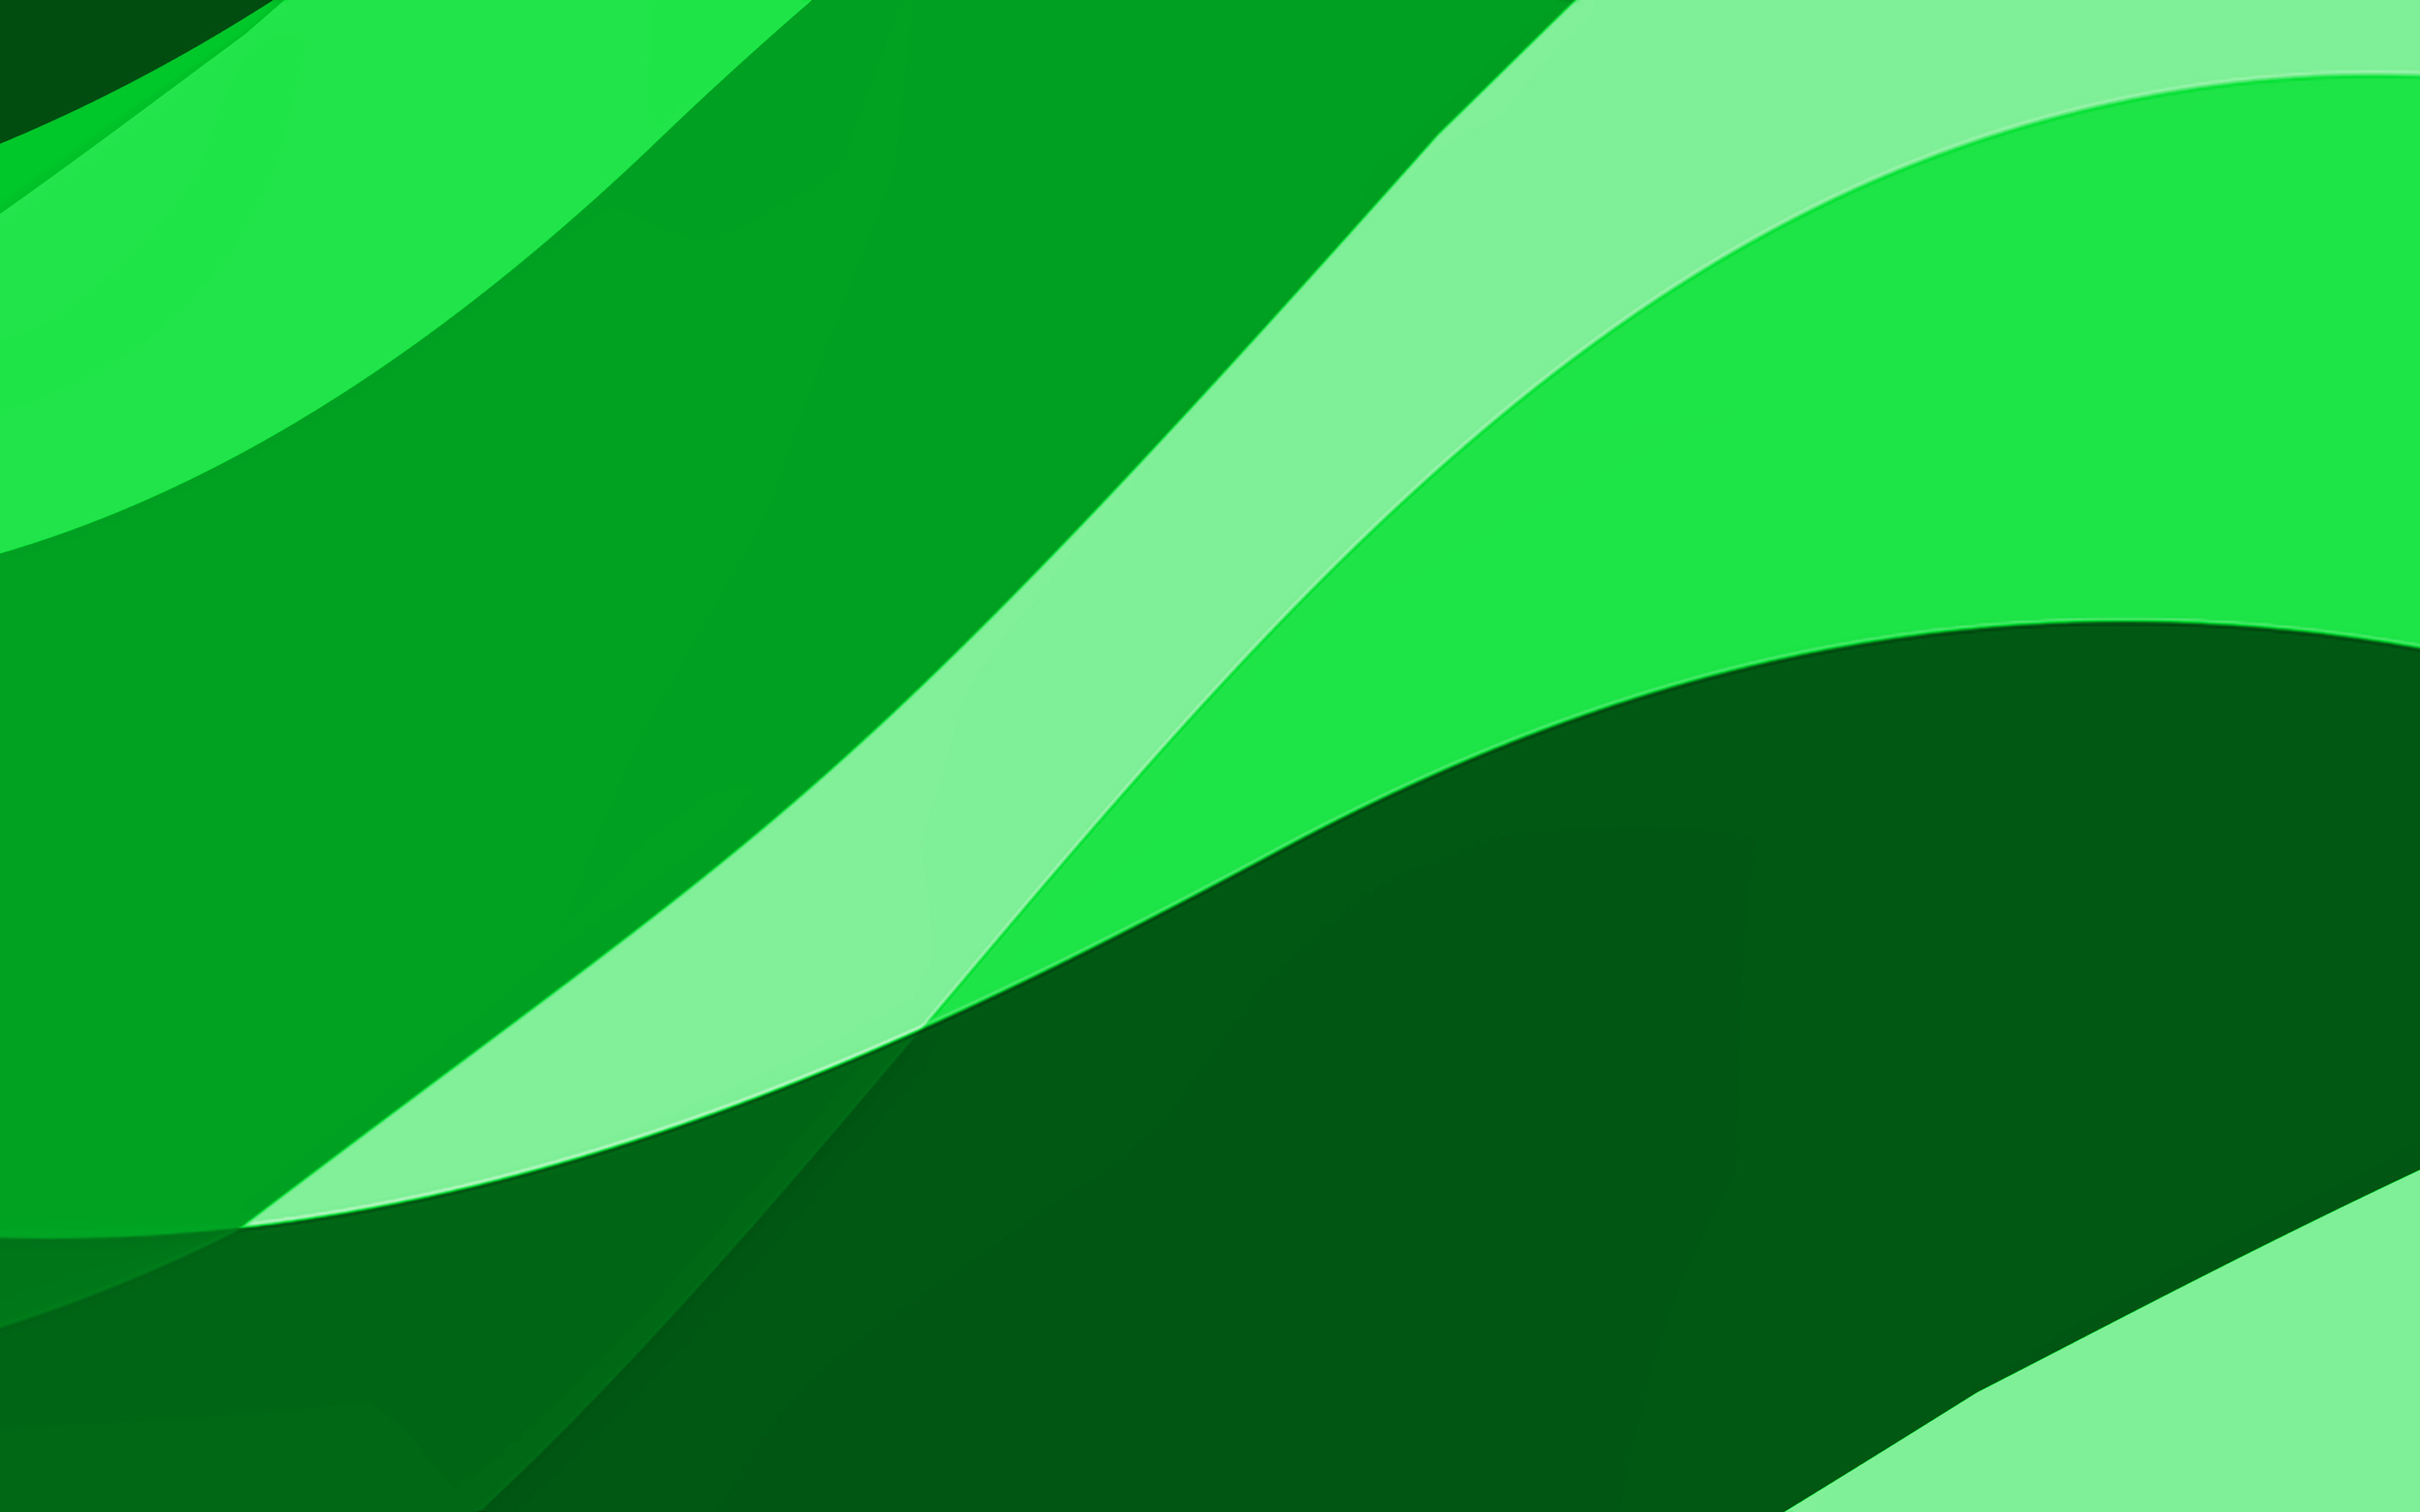 Download wallpapers green abstract waves, 4k, minimal, green wavy background,  material design, abstract waves, green backgrounds, creative, waves  patterns for desktop with resolution 3840x2400. High Quality HD pictures  wallpapers